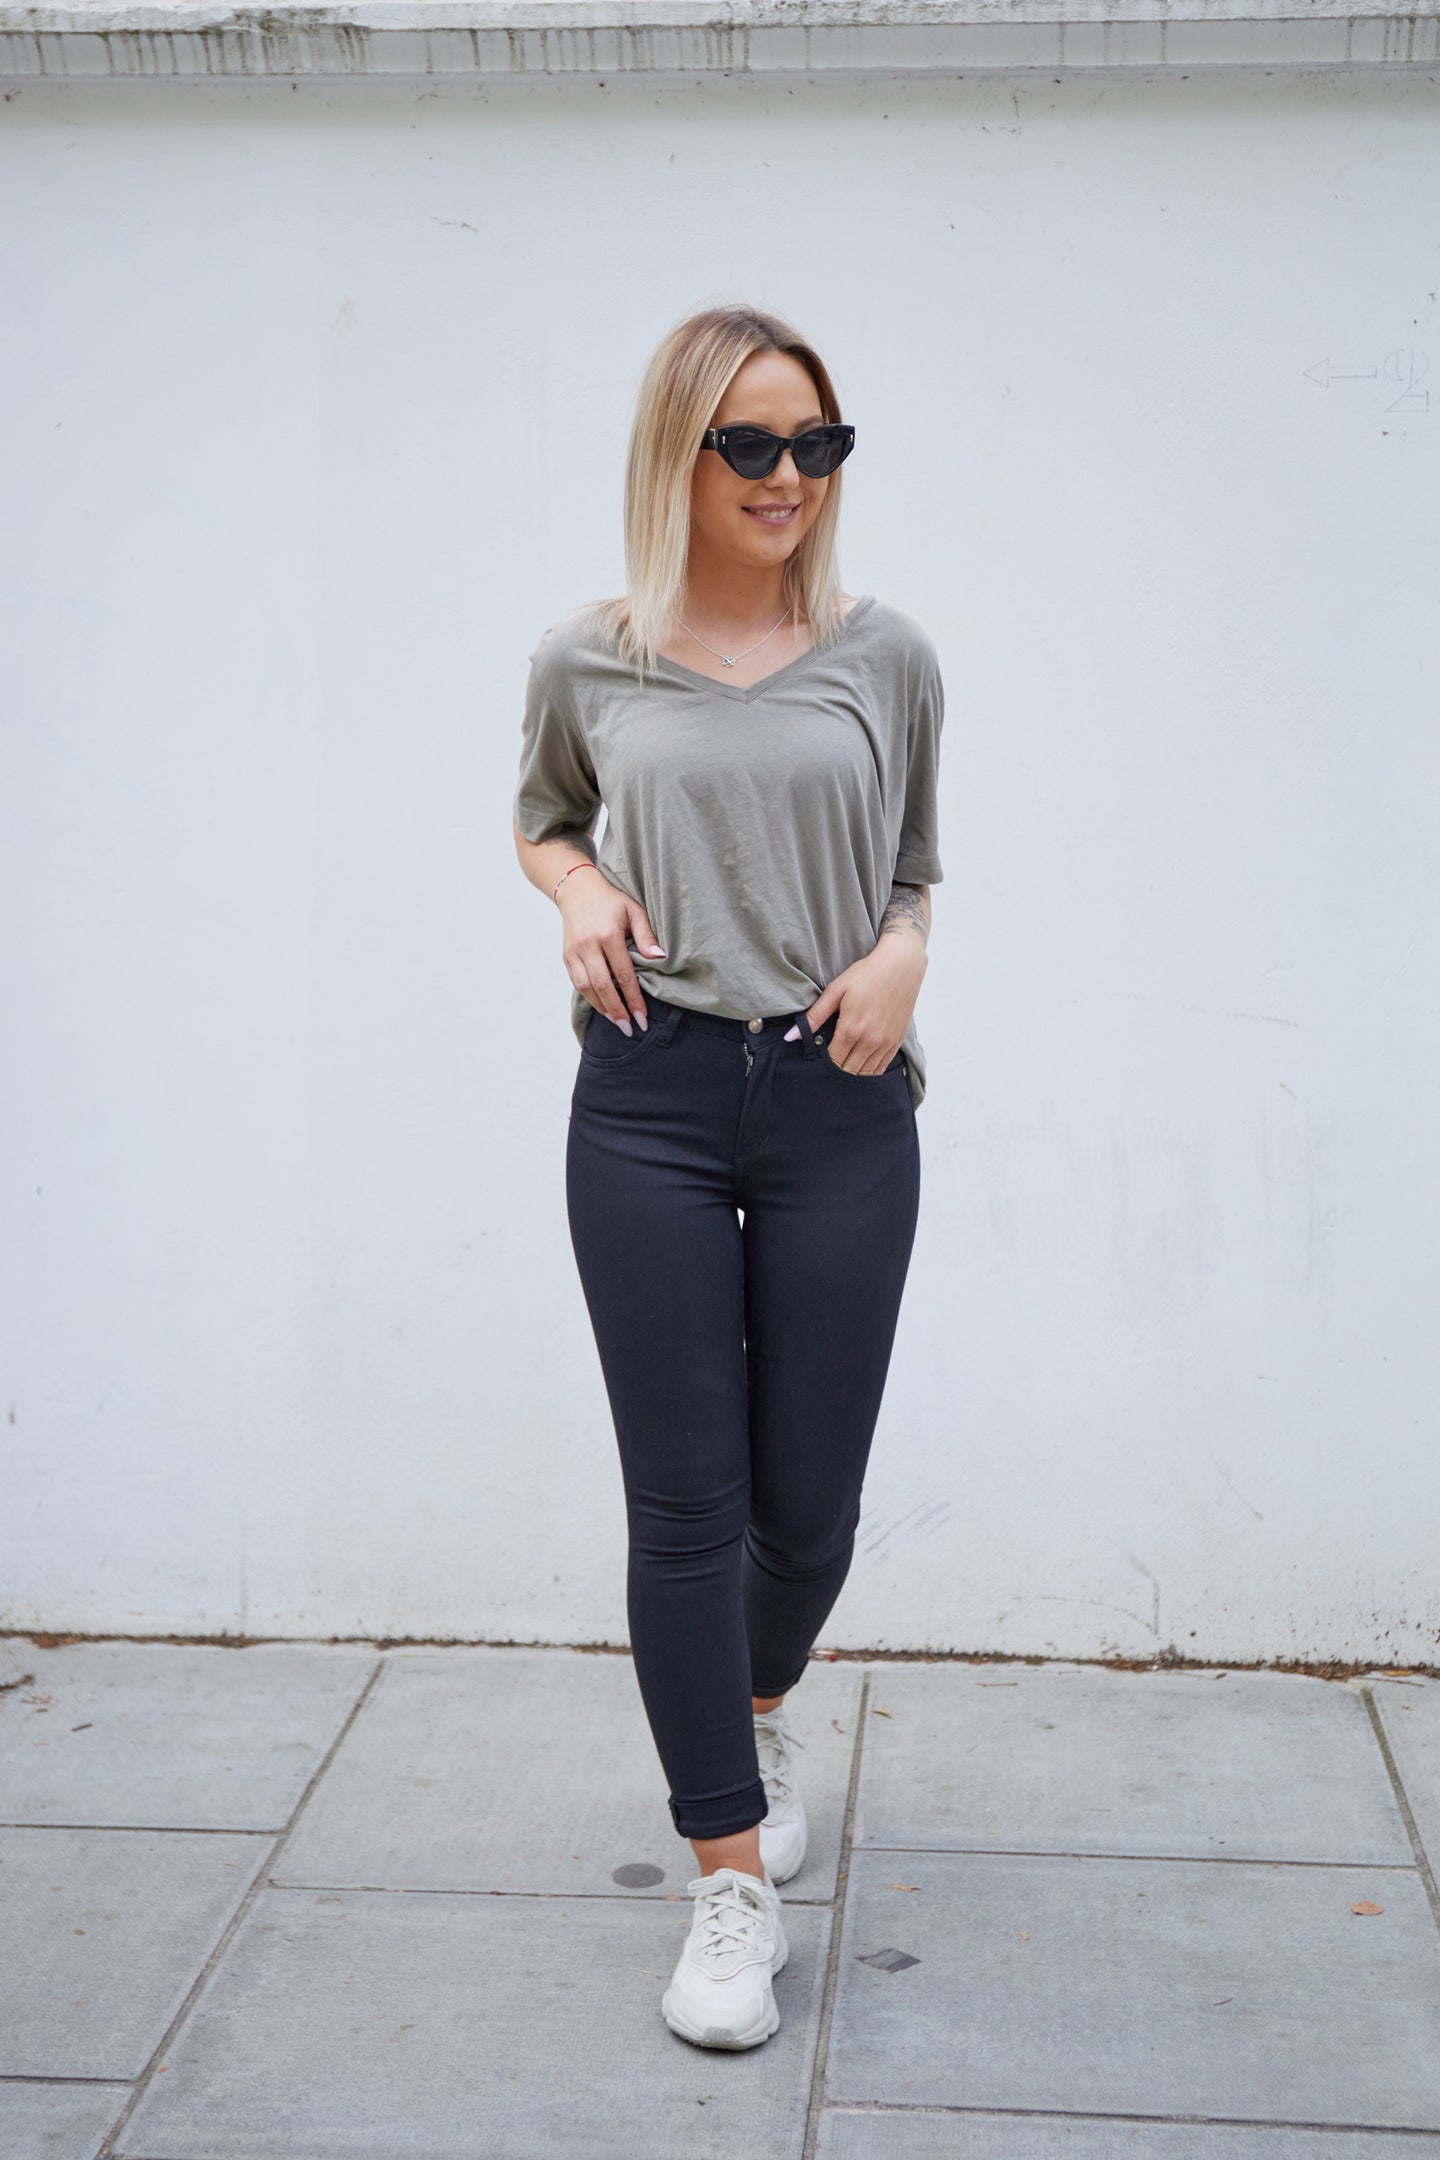 black super skinny high waisted jeans rizzo